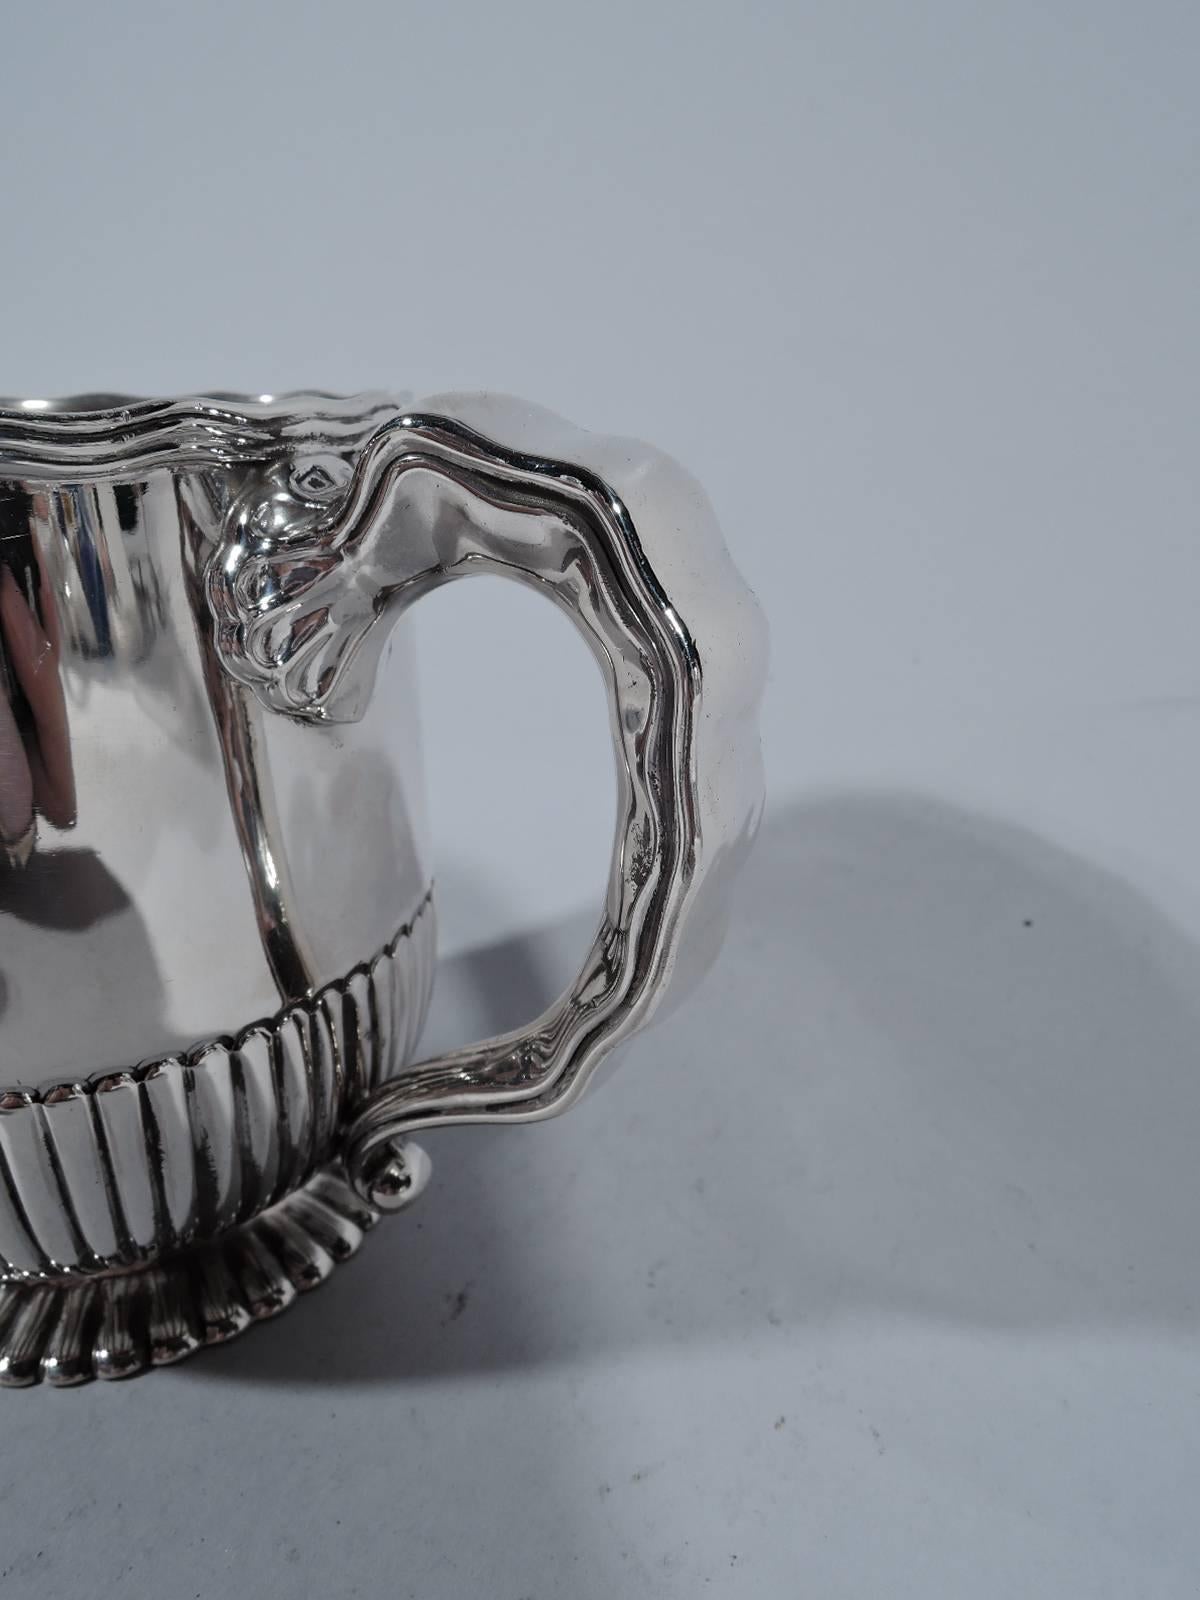 Sterling silver baby cup. Made by Gorham in Providence. Straight sides curved at bottom on flat foot. Top part vacant lots of room for engraving. Bottom and foot gadrooned. Reeded wavy rim. Notched scroll handle. Hallmark includes no. 3860 and